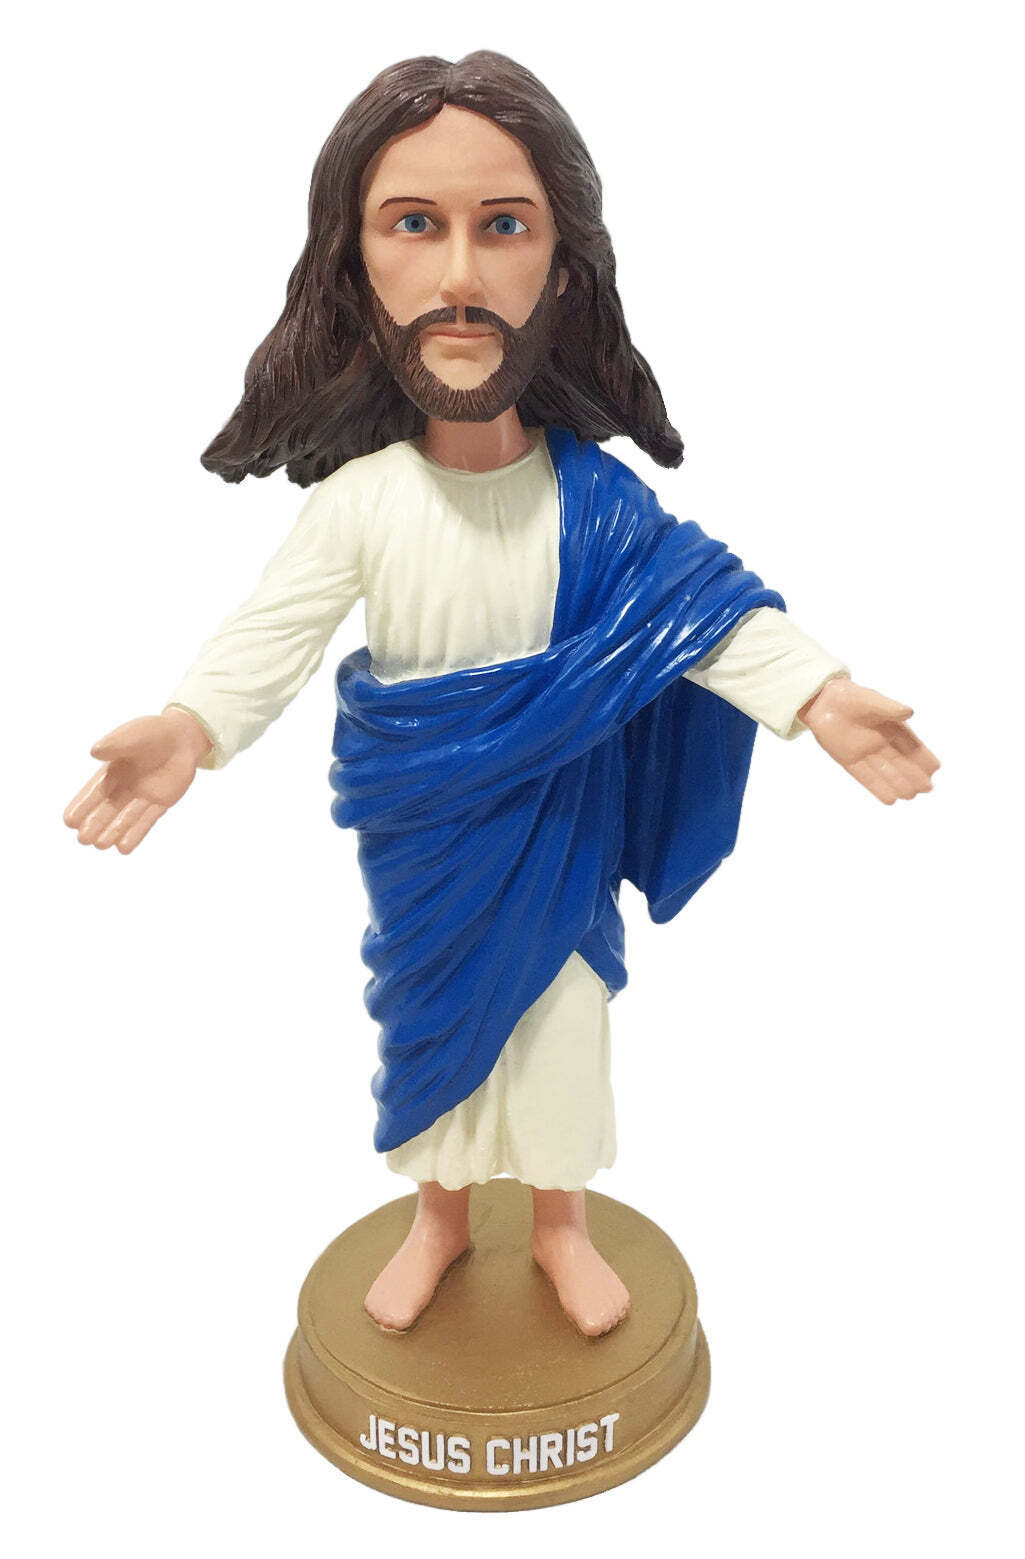 Jesus Christ Limited Edition Religious Bobblehead